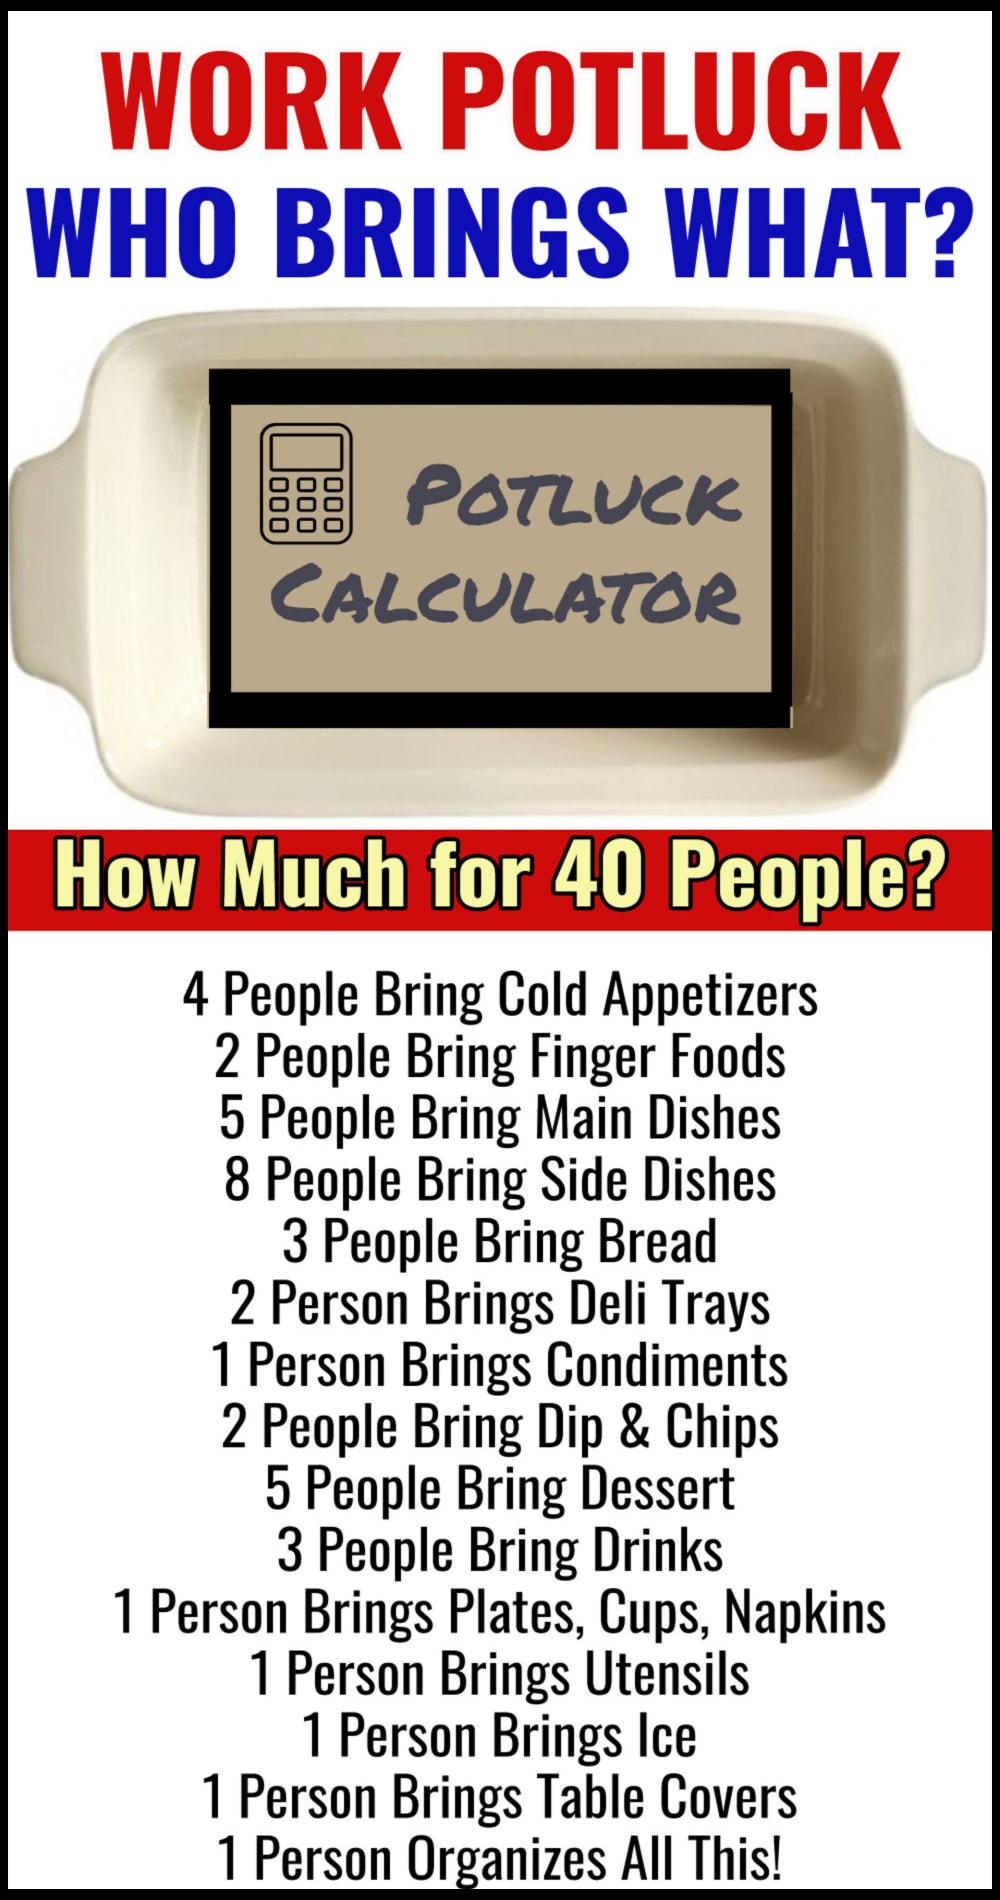 potluck calculator - how much food for a work potluck with 40 people